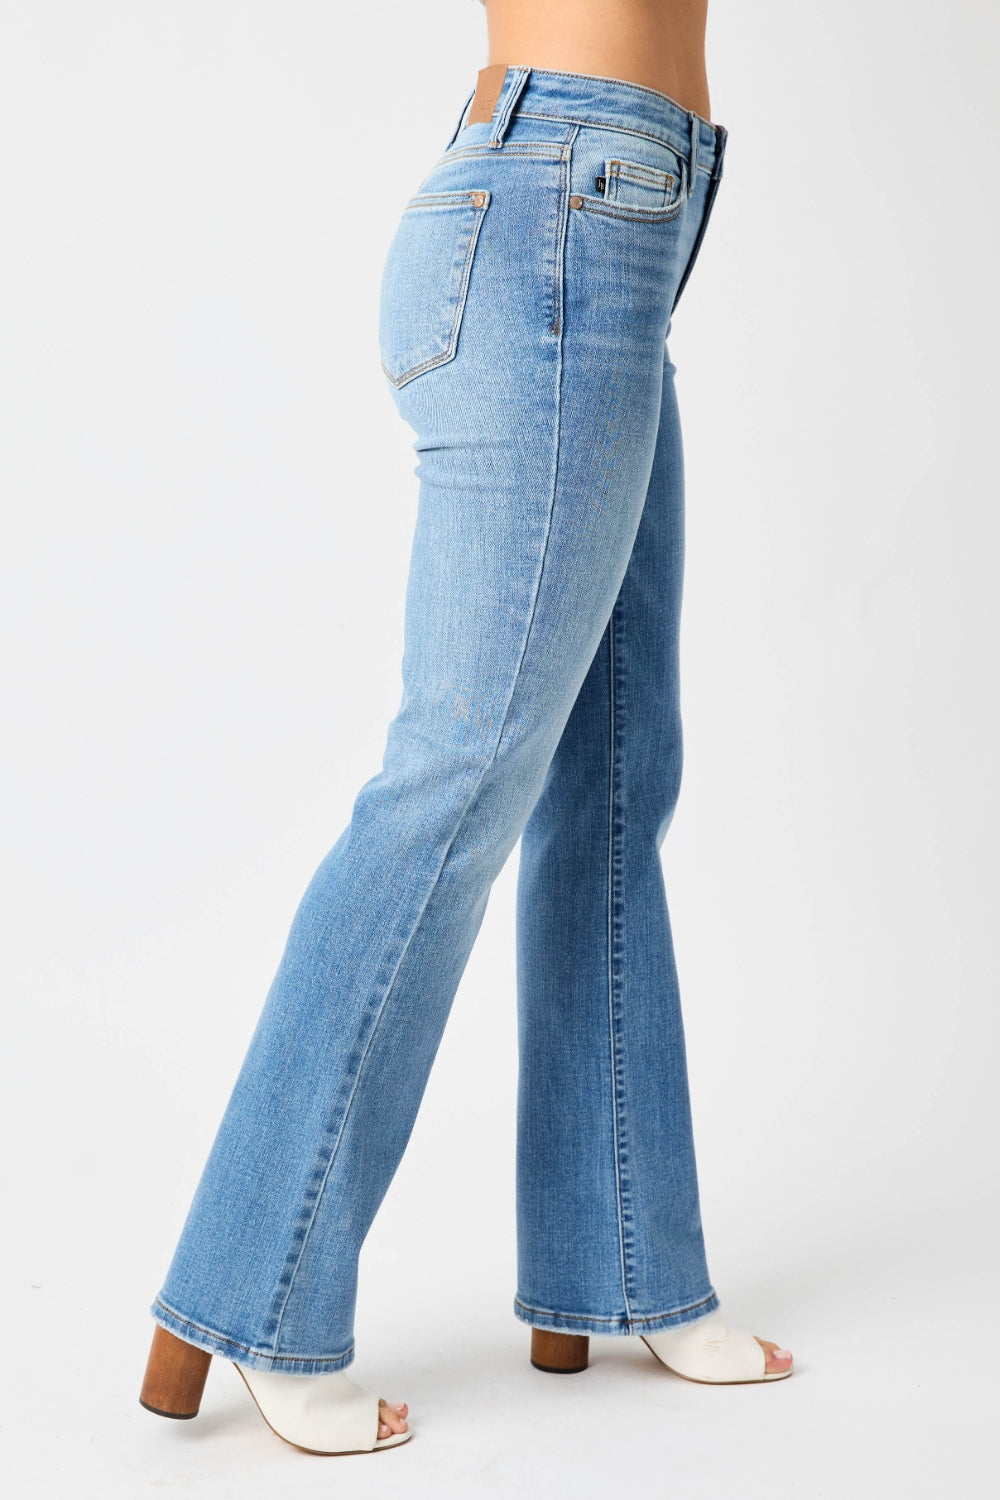 Judy Blue Full Size High Waist Straight Jeans - The Teal Antler Boutique